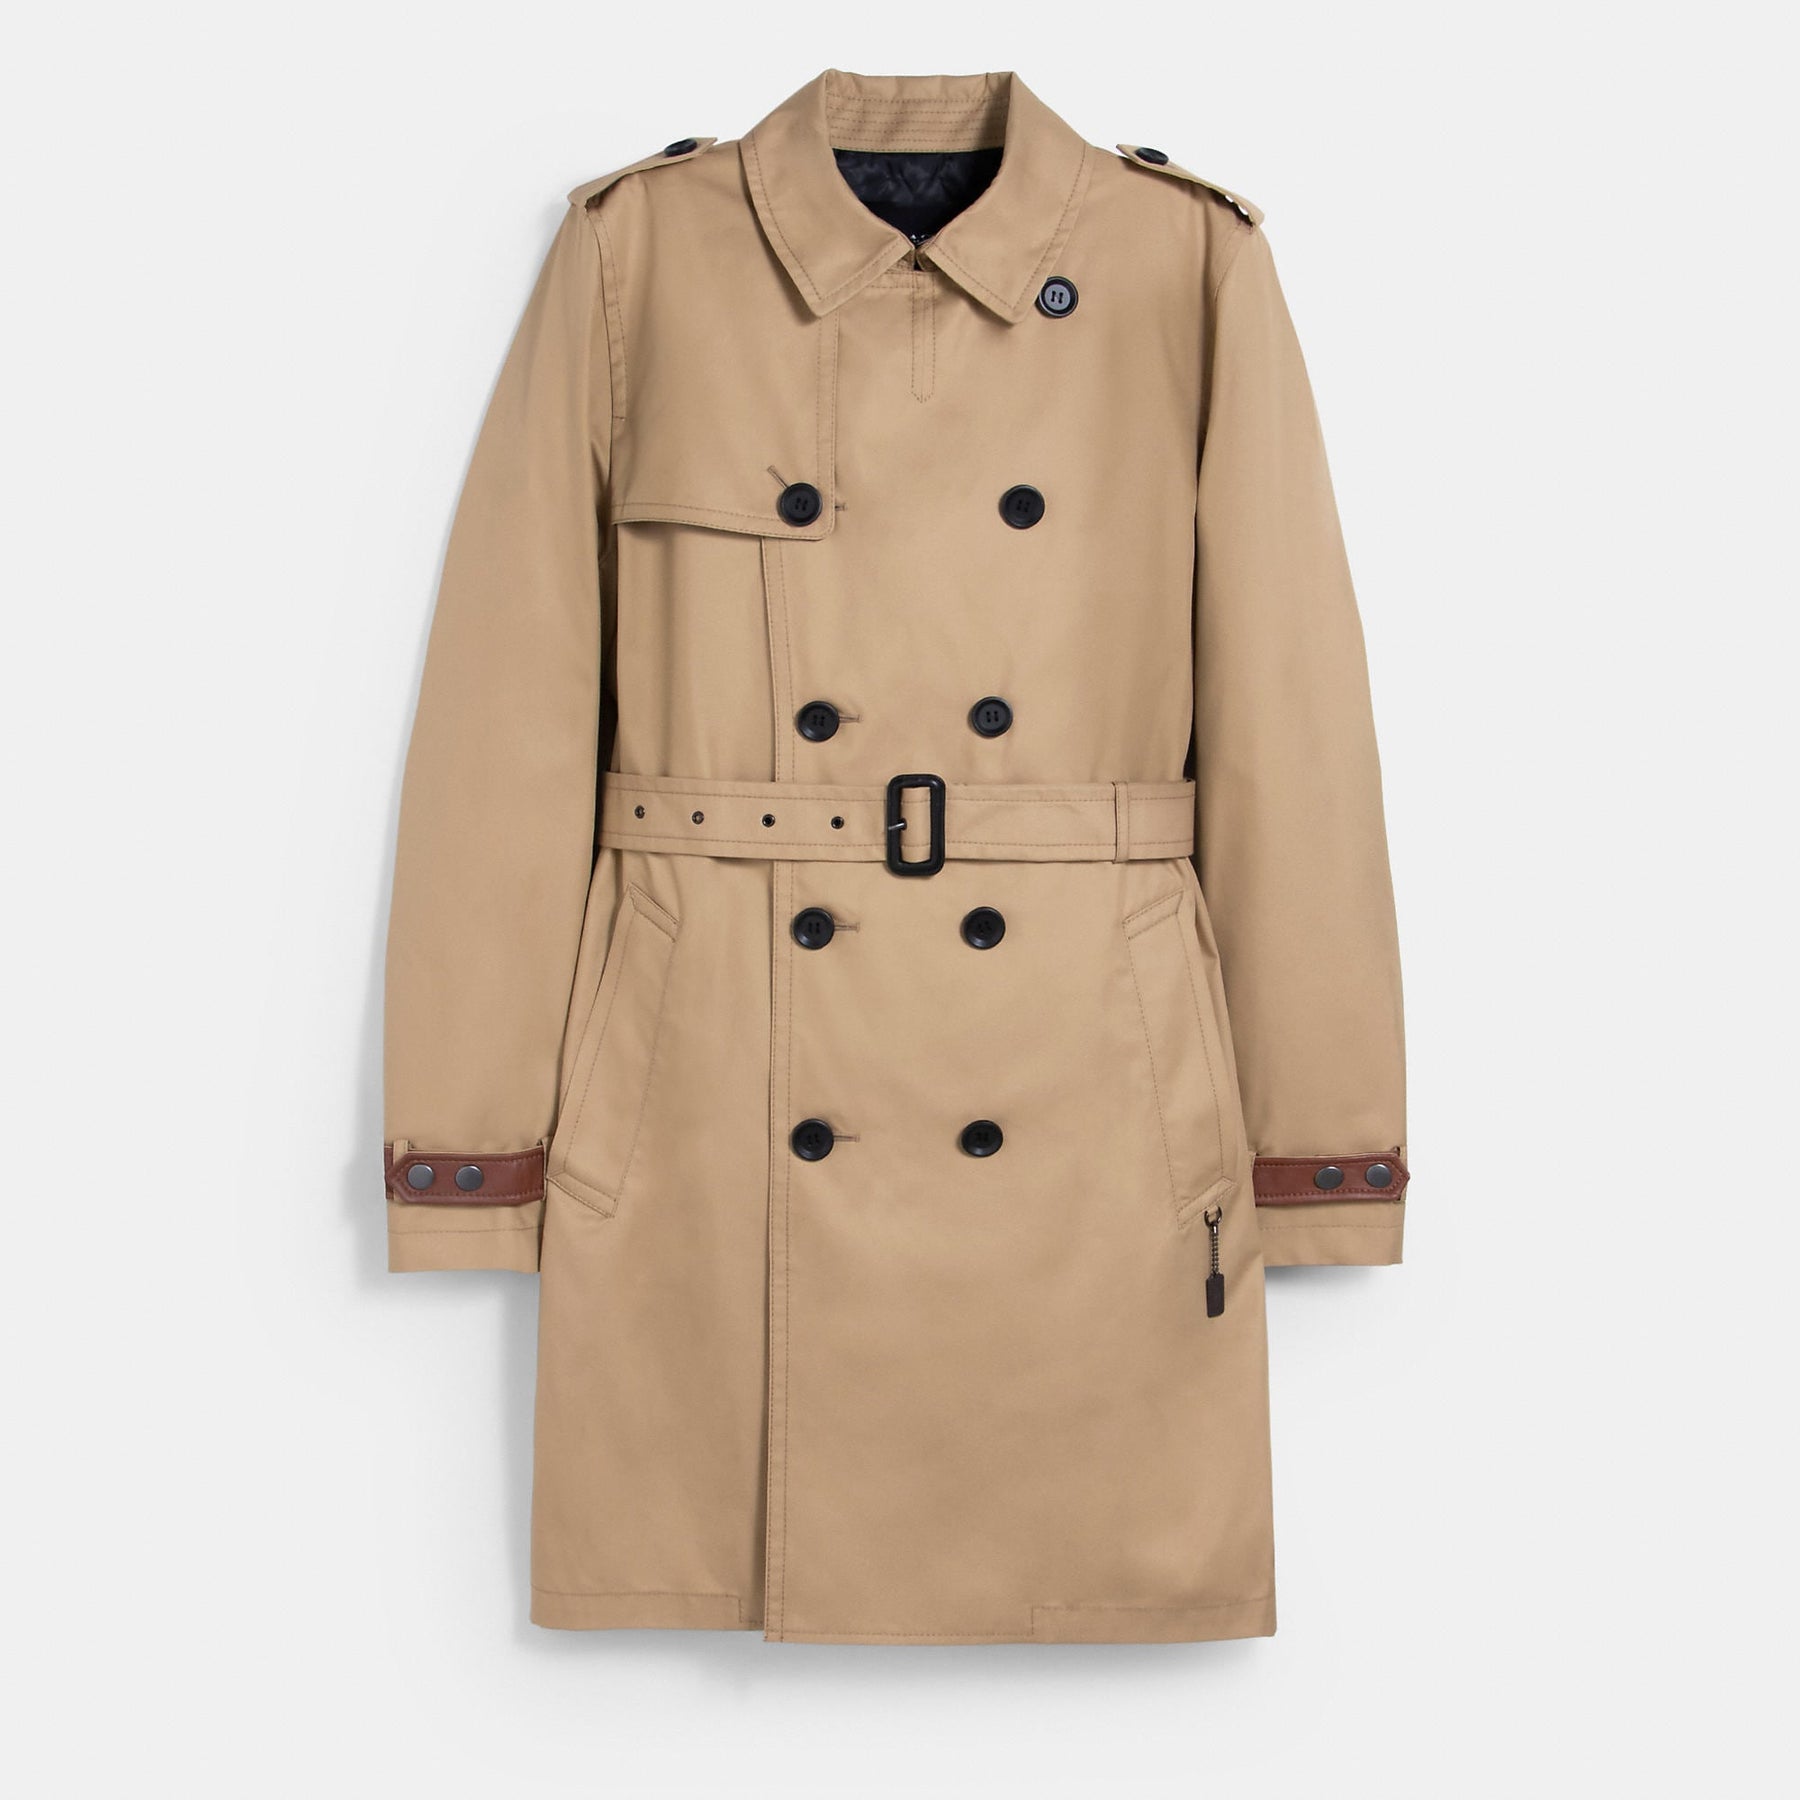 Double Breasted House of Gucci Maurizio Gucci Trench Coat - Jacket Makers